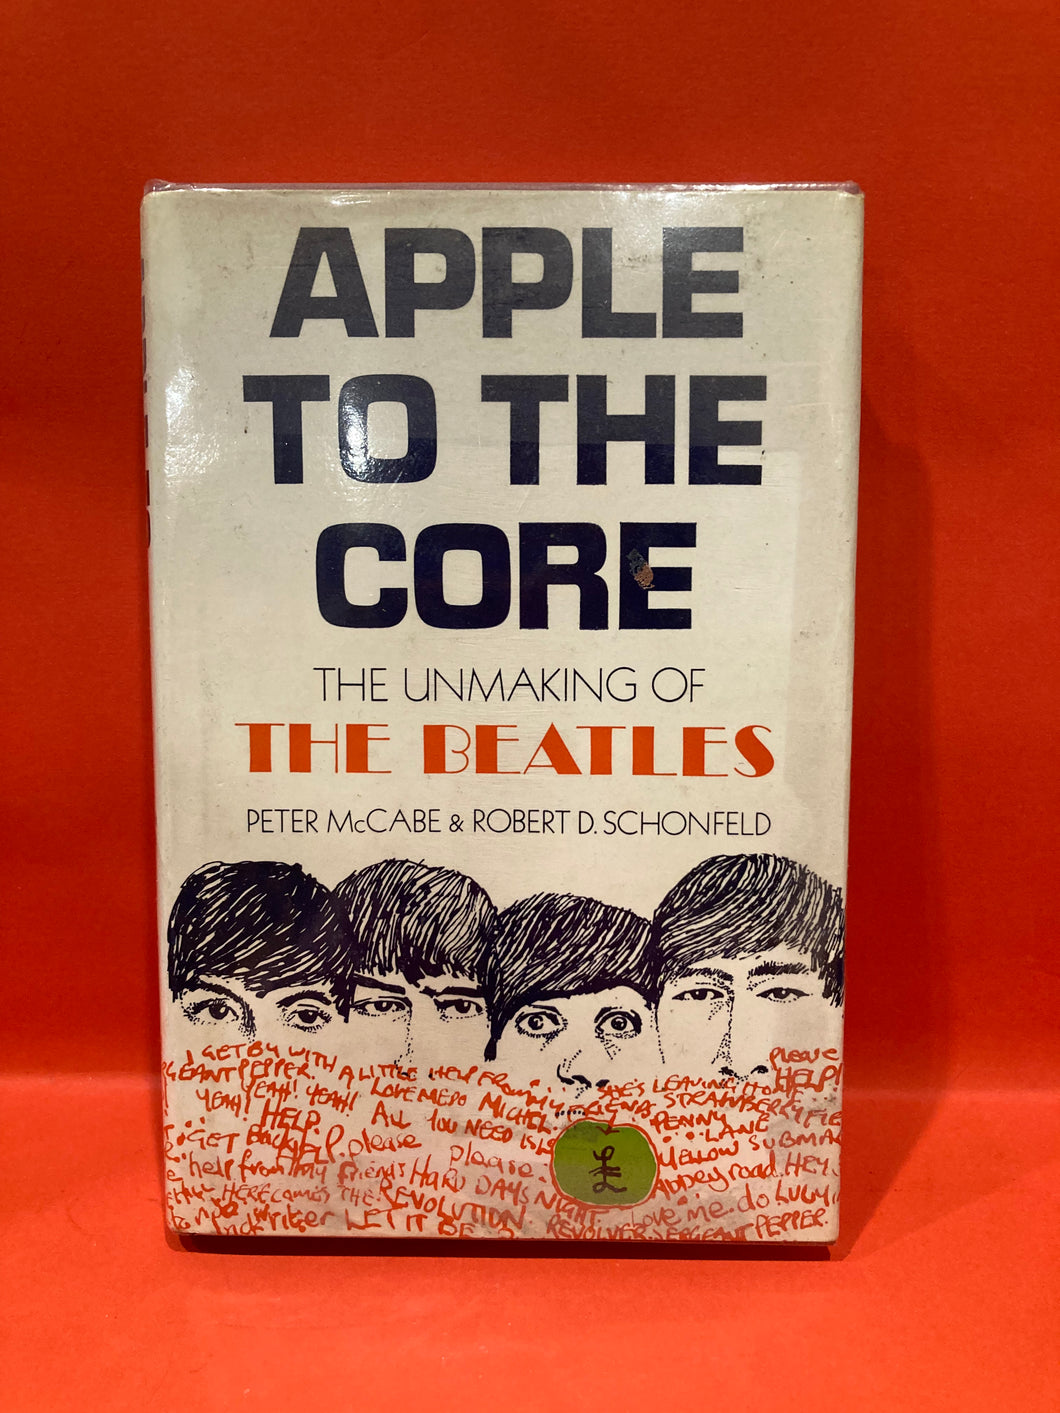 APPLE TO THE CORE - THE UNMAKING OF THE BEATLES by PETER McCABE & ROBERT D. SCHONFELD - HARDCOVER BOOK